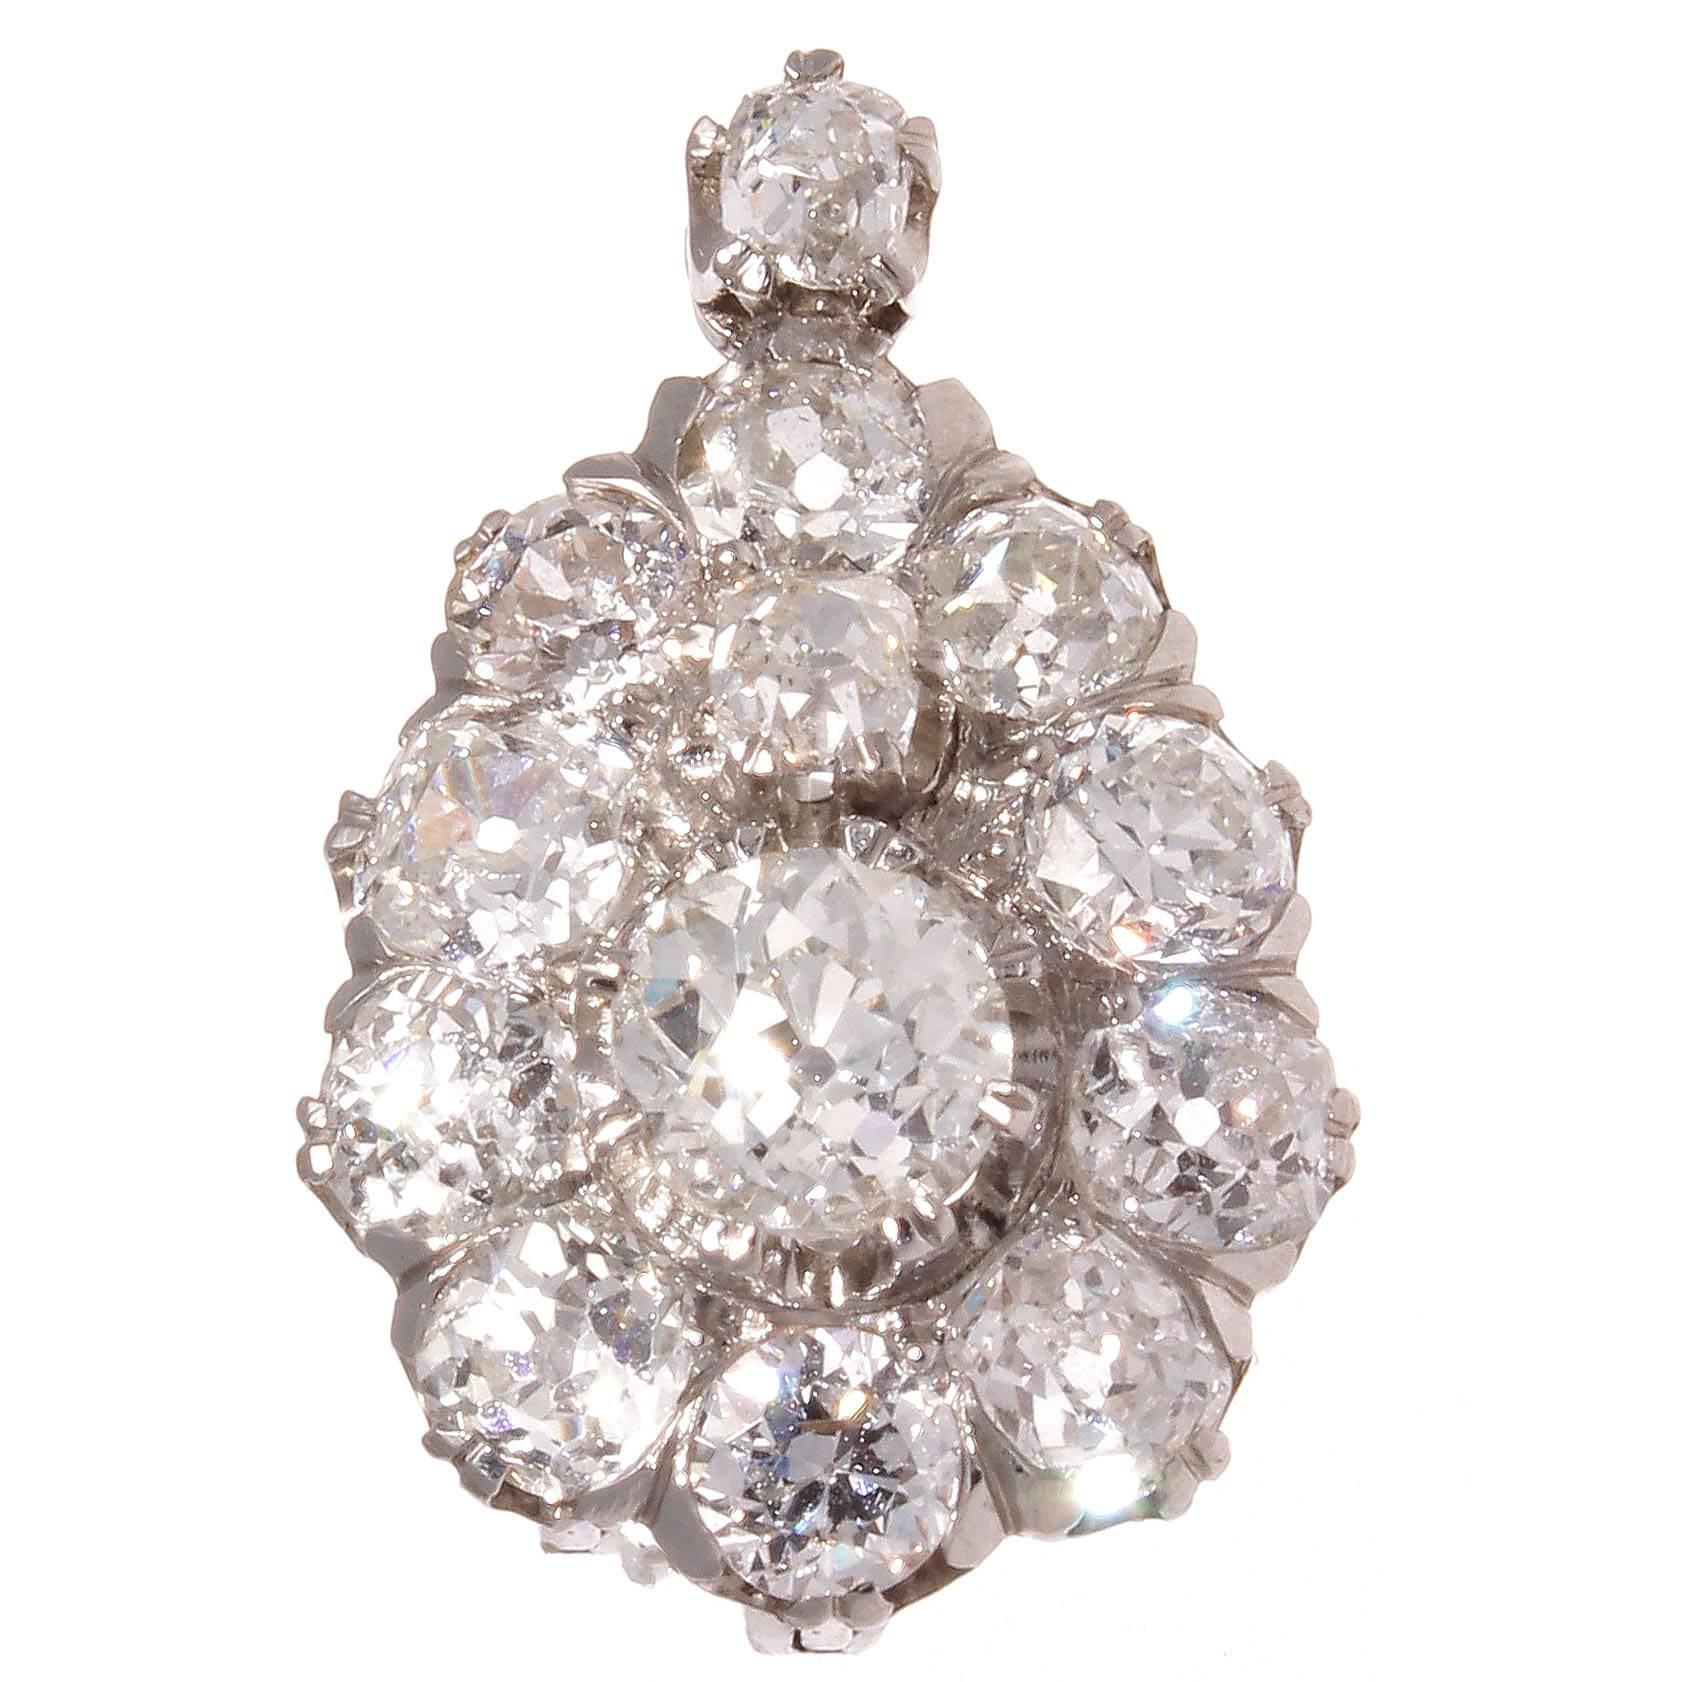 A cluster of light that will brighten any room and enhance any ear so lucky to be wearing it. Featuring two center diamonds weighing 1.36 carats. Surrounded by halos of perfectly matching old cut diamonds weighing approximately 4 carats. Crafted in